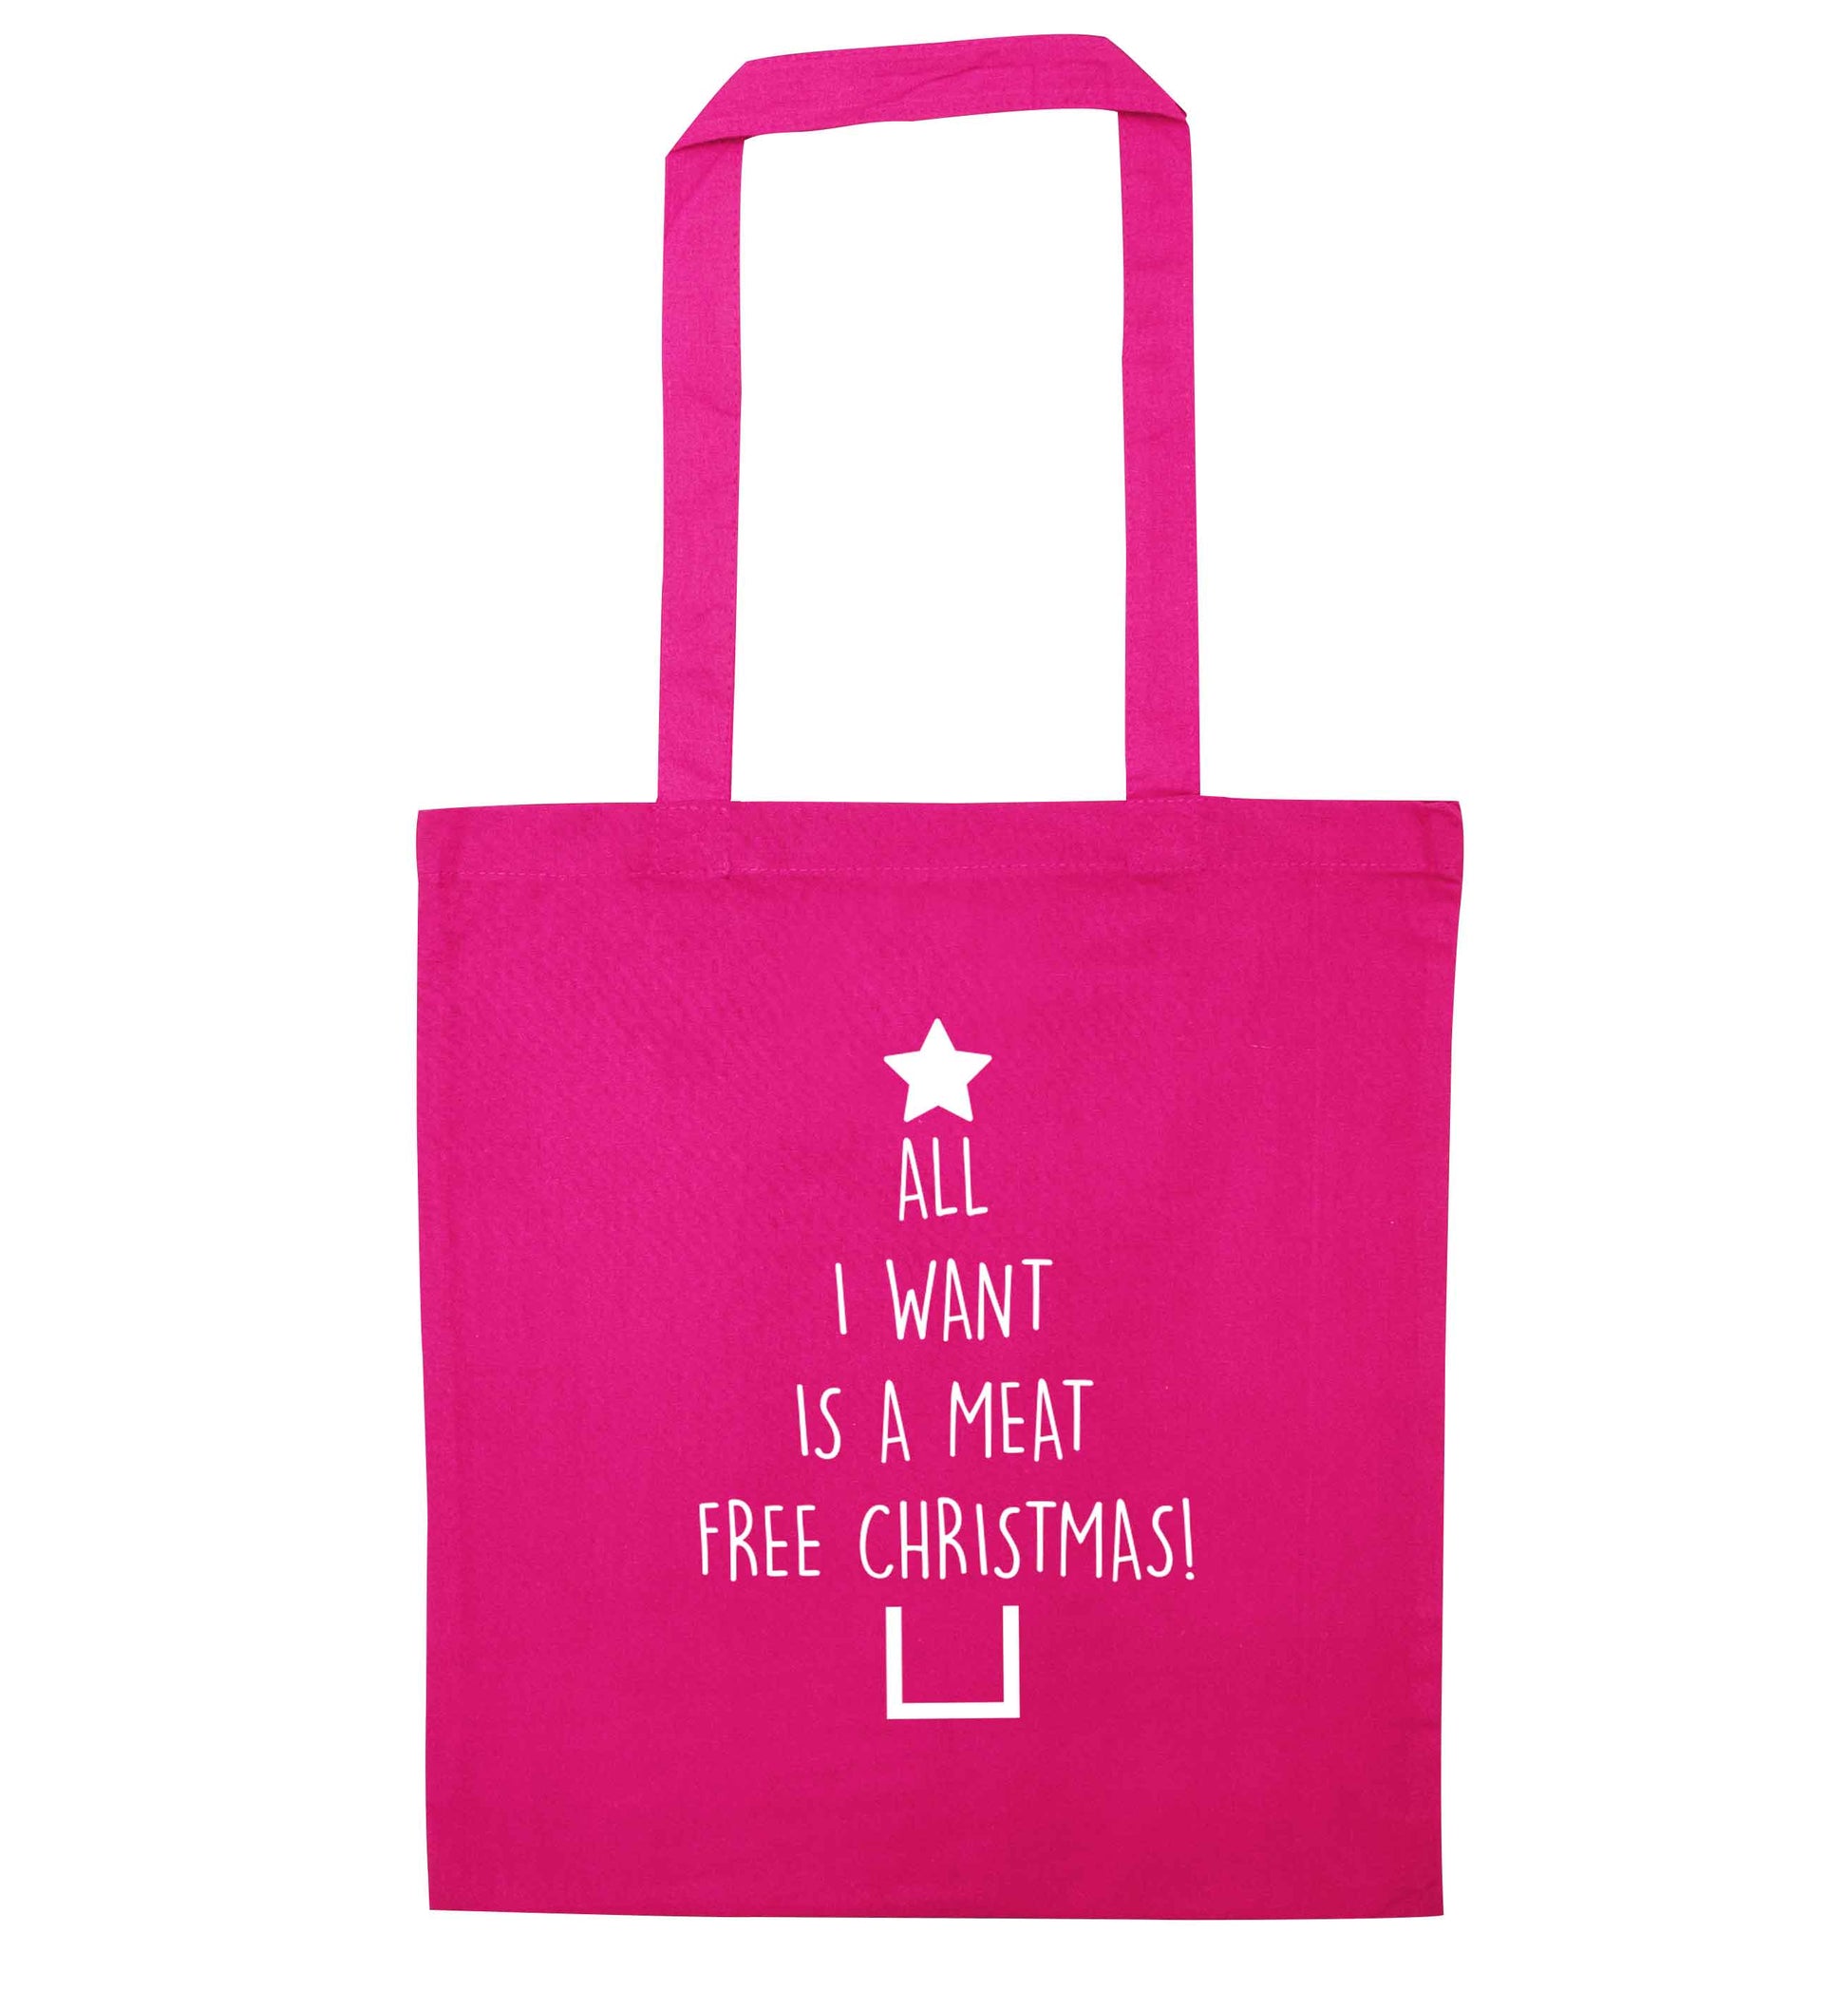 All I want is a meat free Christmas pink tote bag